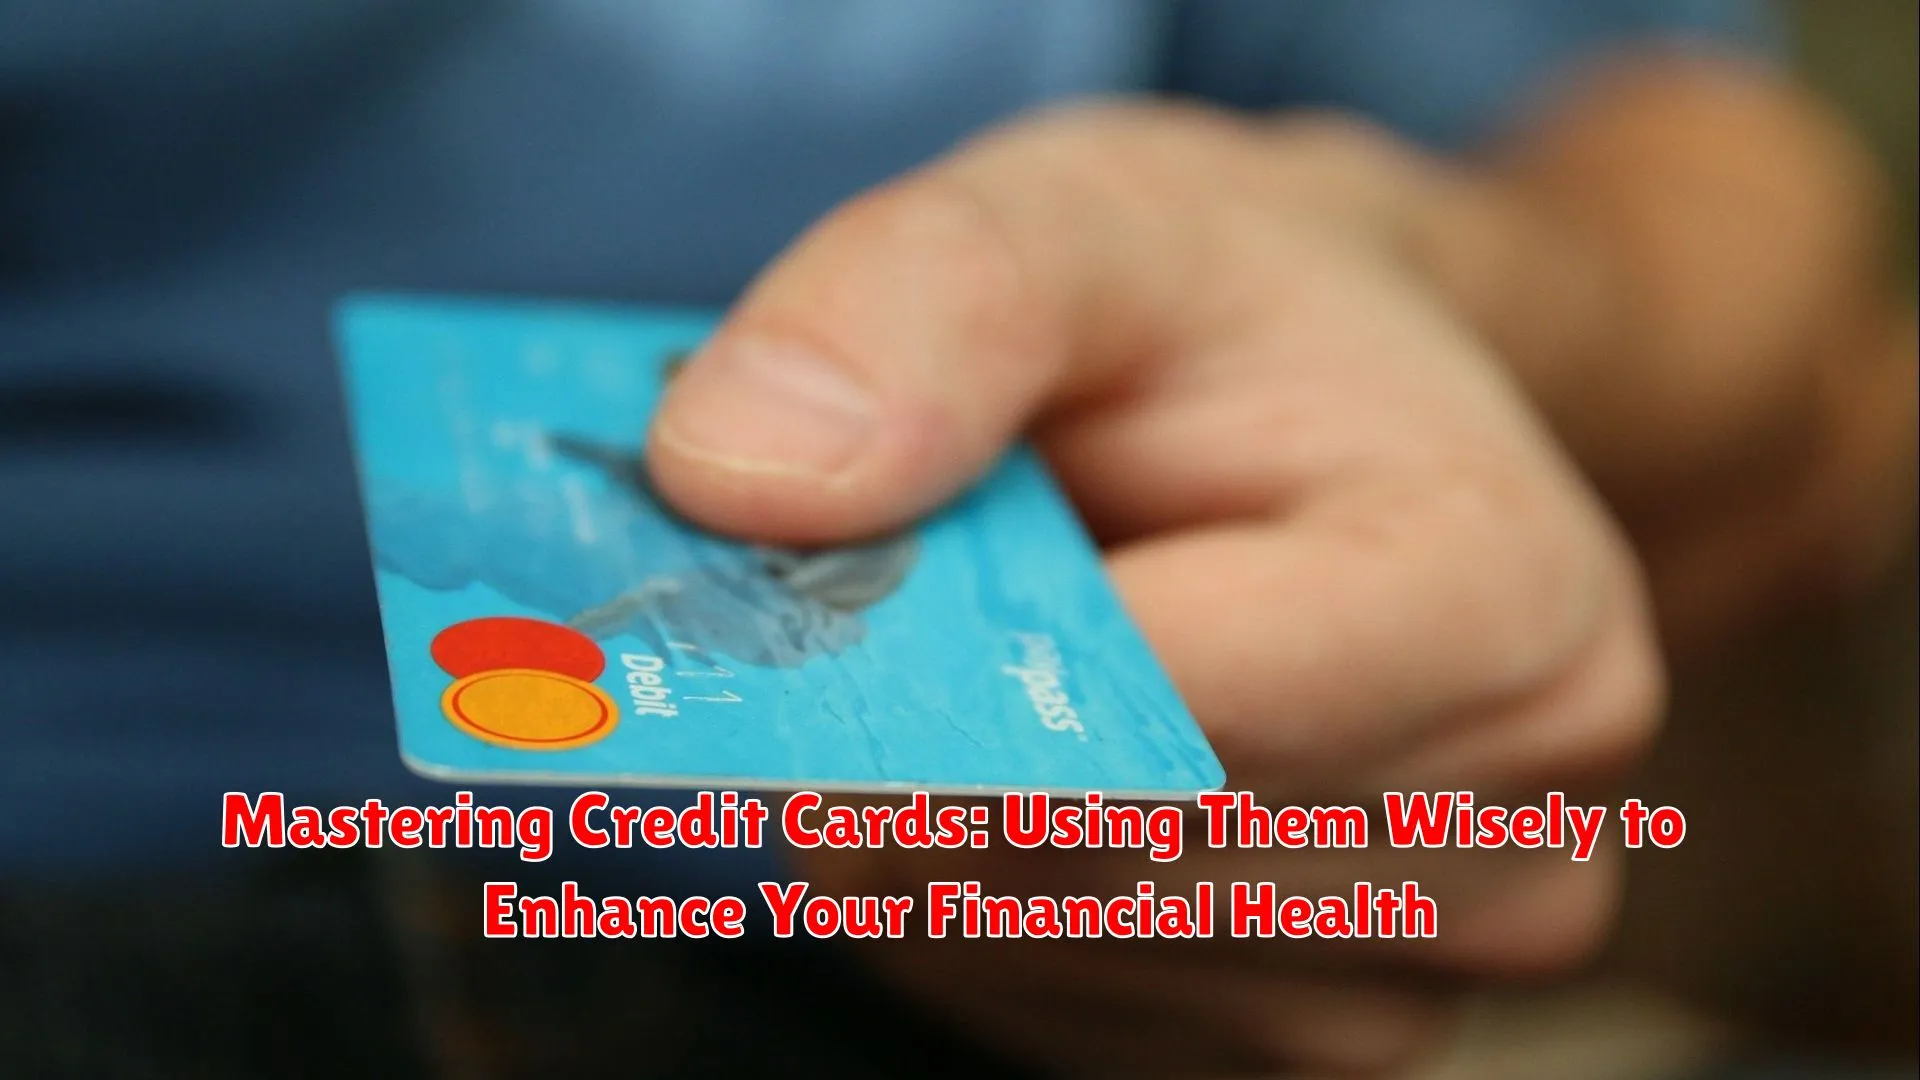 Mastering Credit Cards: Using Them Wisely to Enhance Your Financial Health